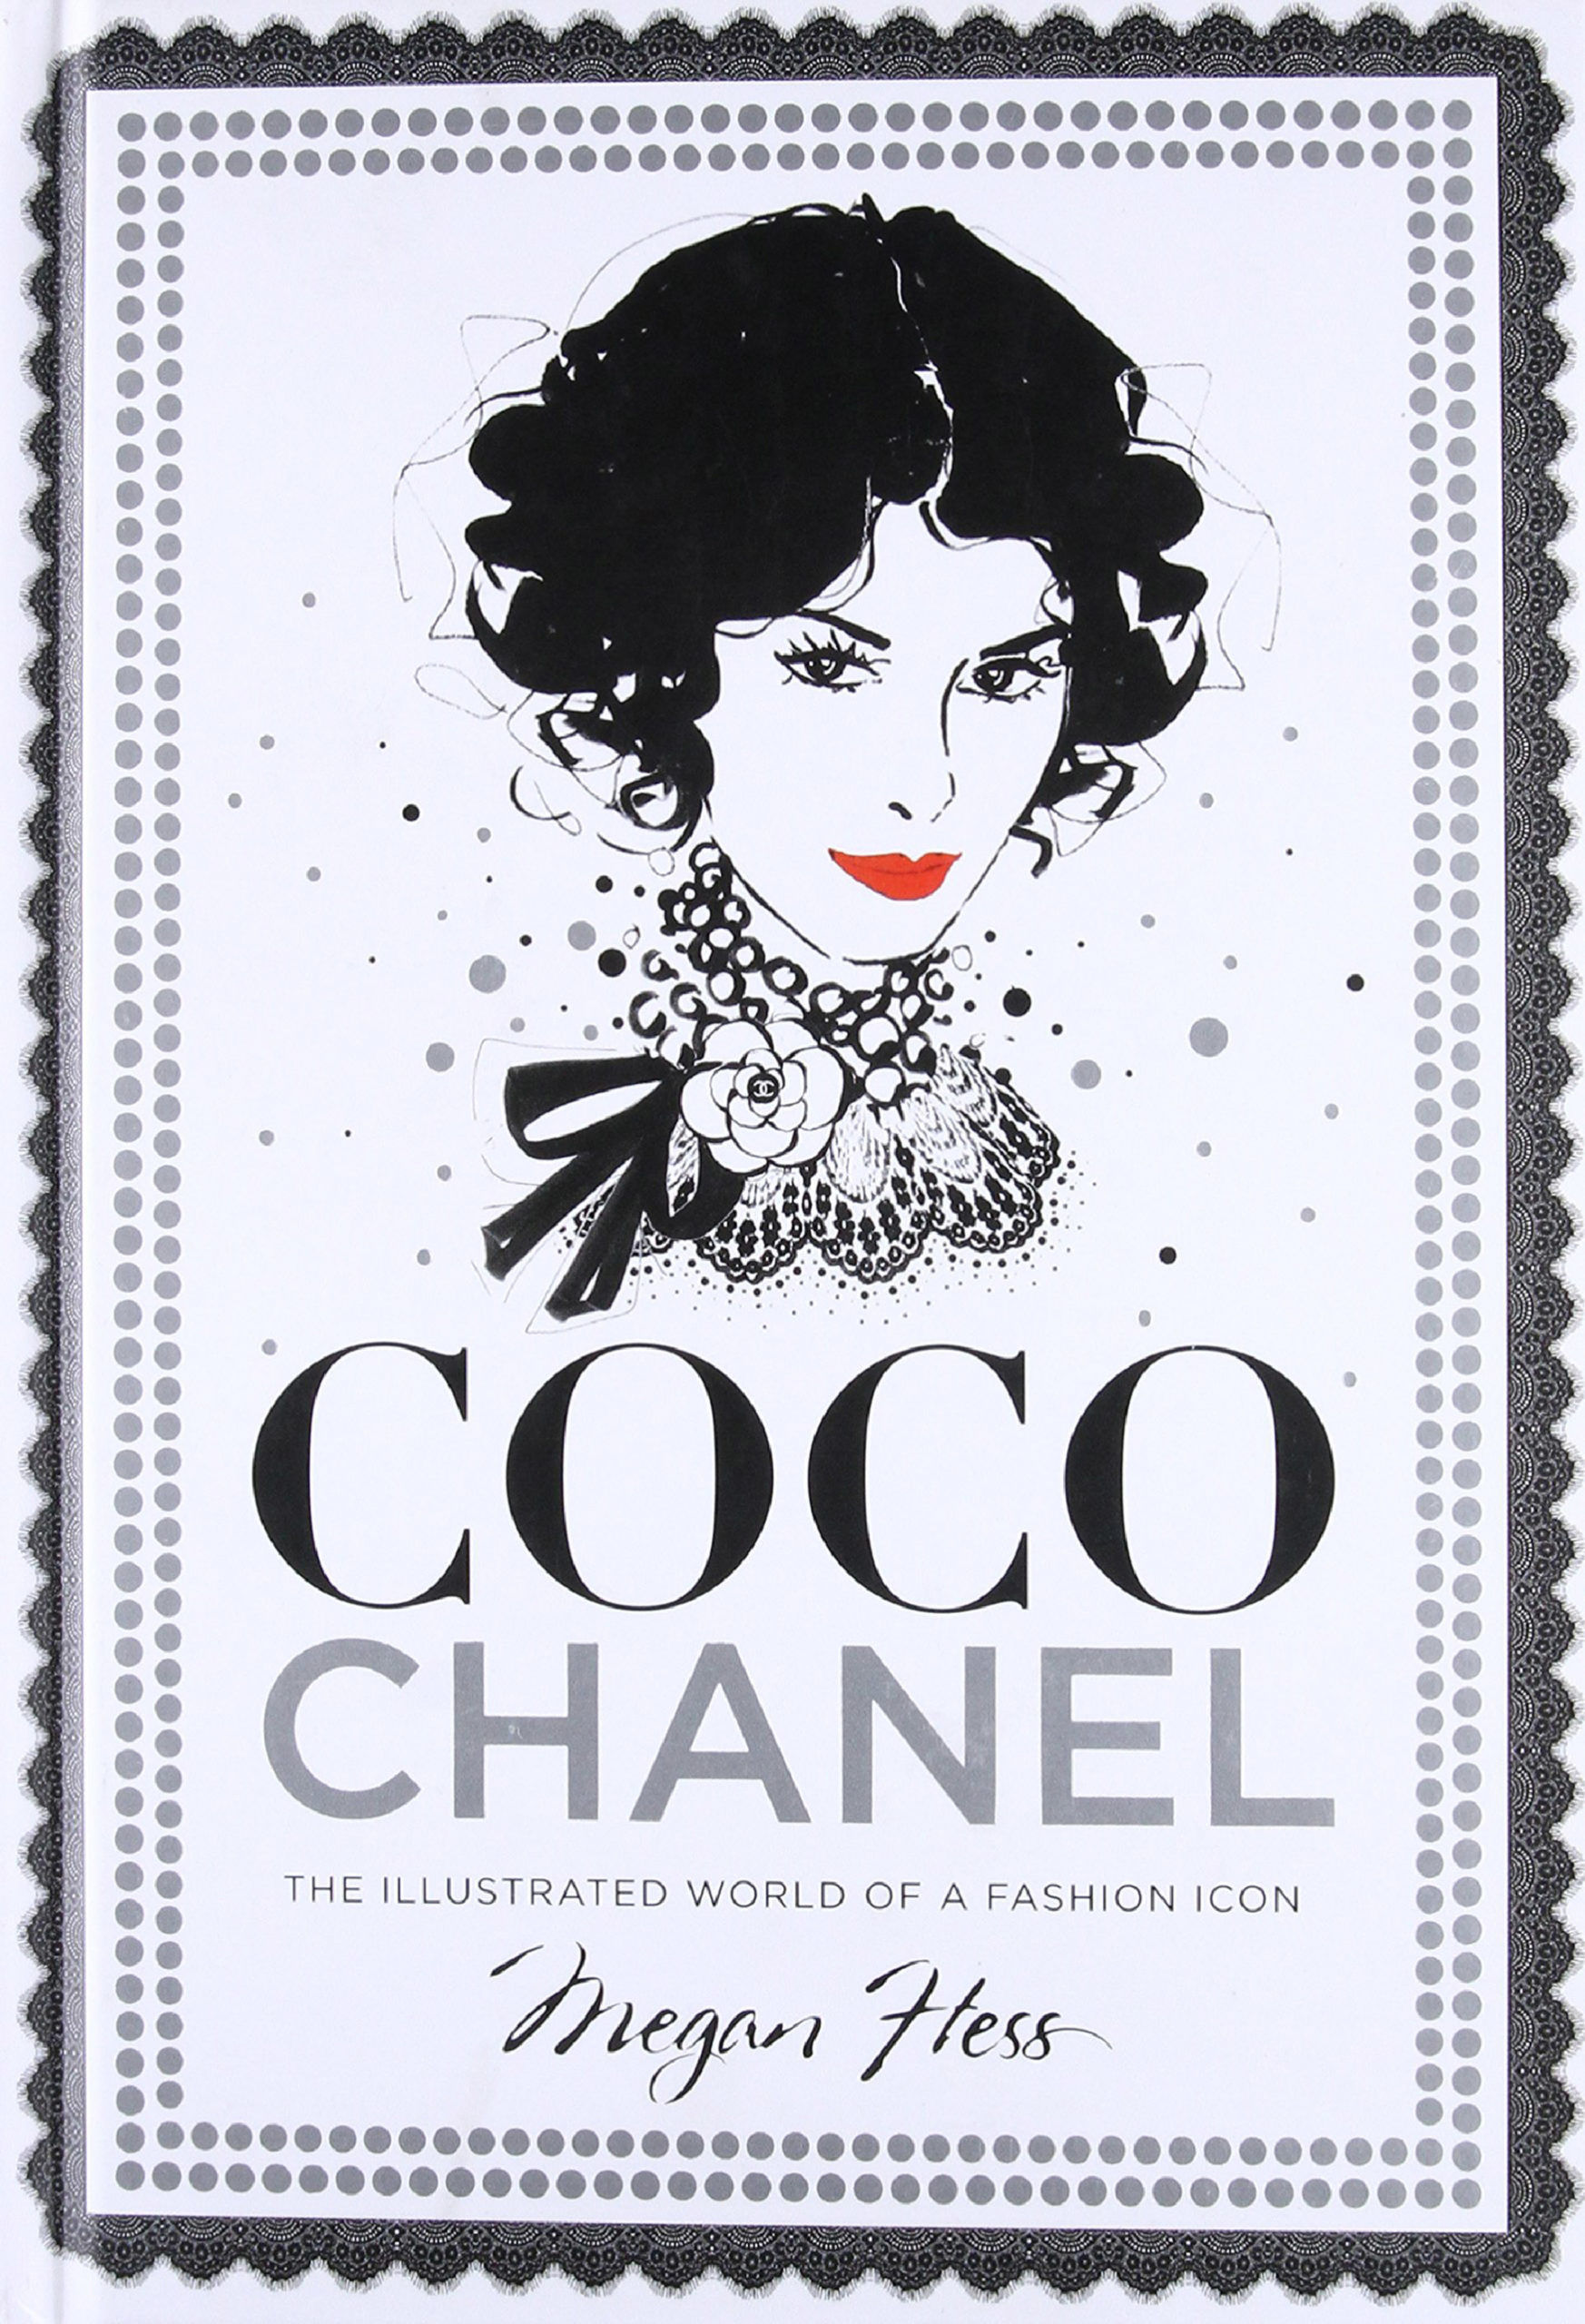 3 books to immerse yourself in the timeless style of Gabrielle Chanel